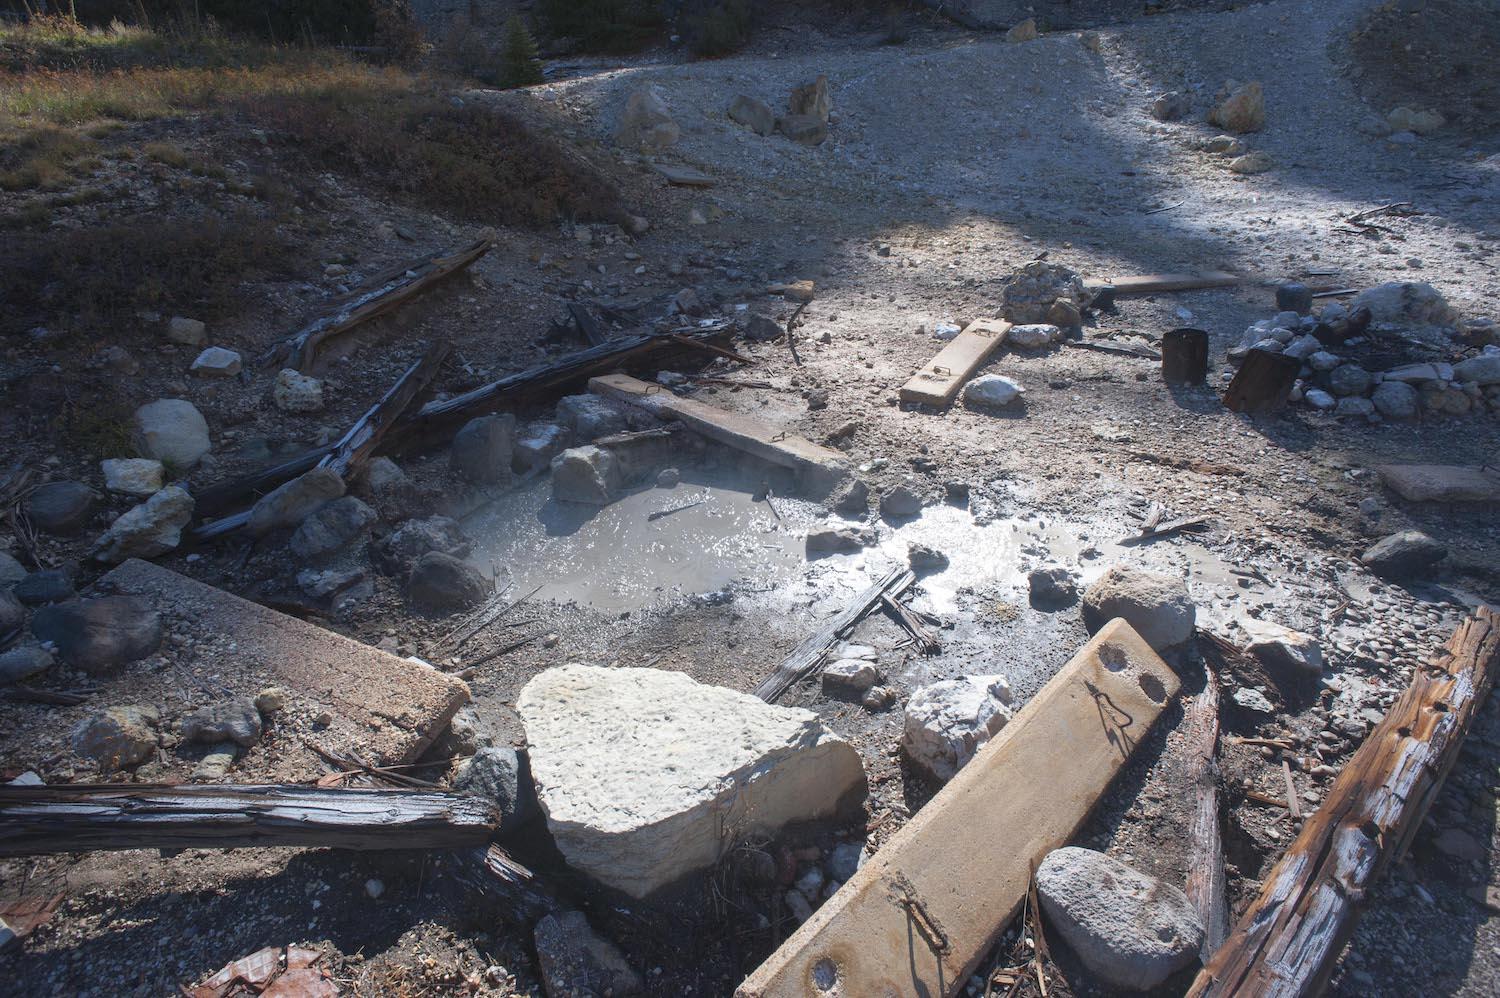 This debris, possibly related to a bathhouse, surrounds a bubbling mudpot/Patrick Cone